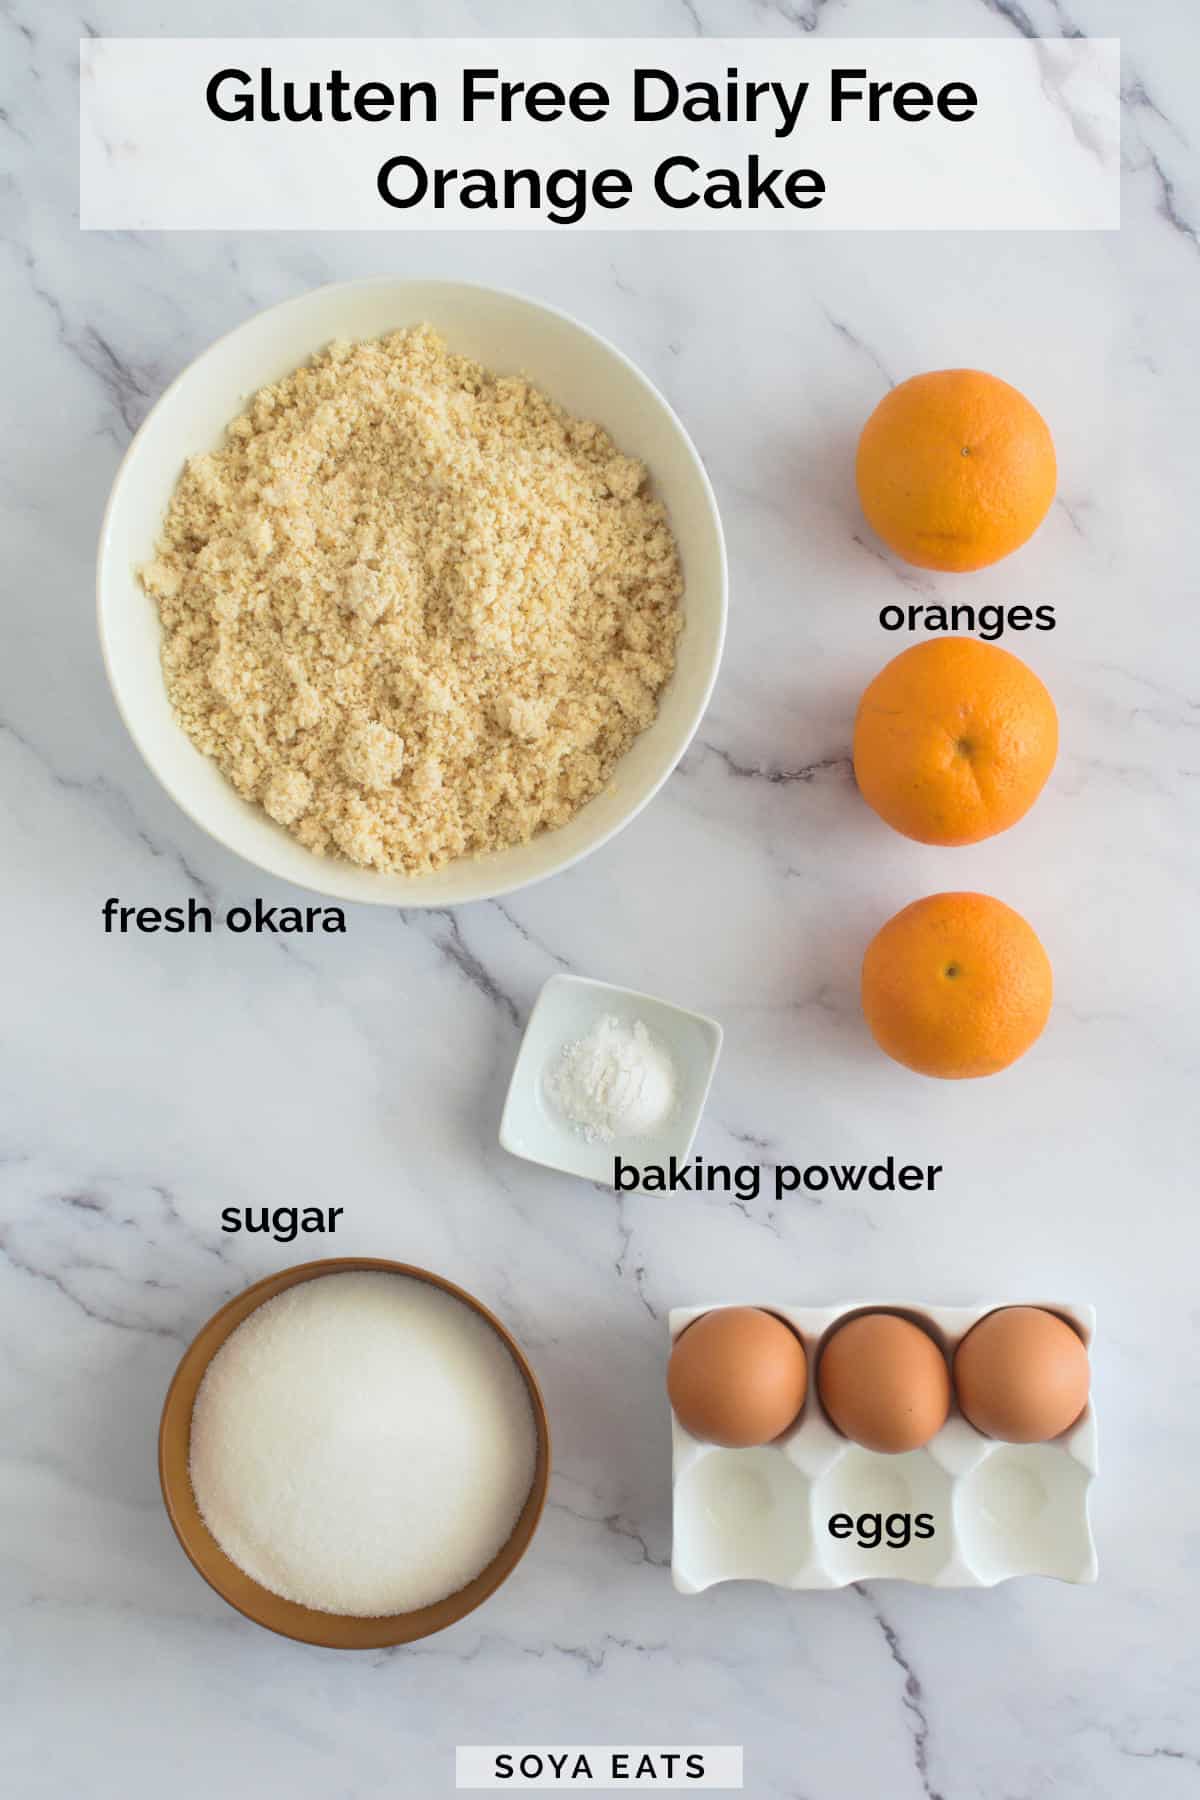 Image of the ingredients needed to make a gluten free dairy free orange cake.